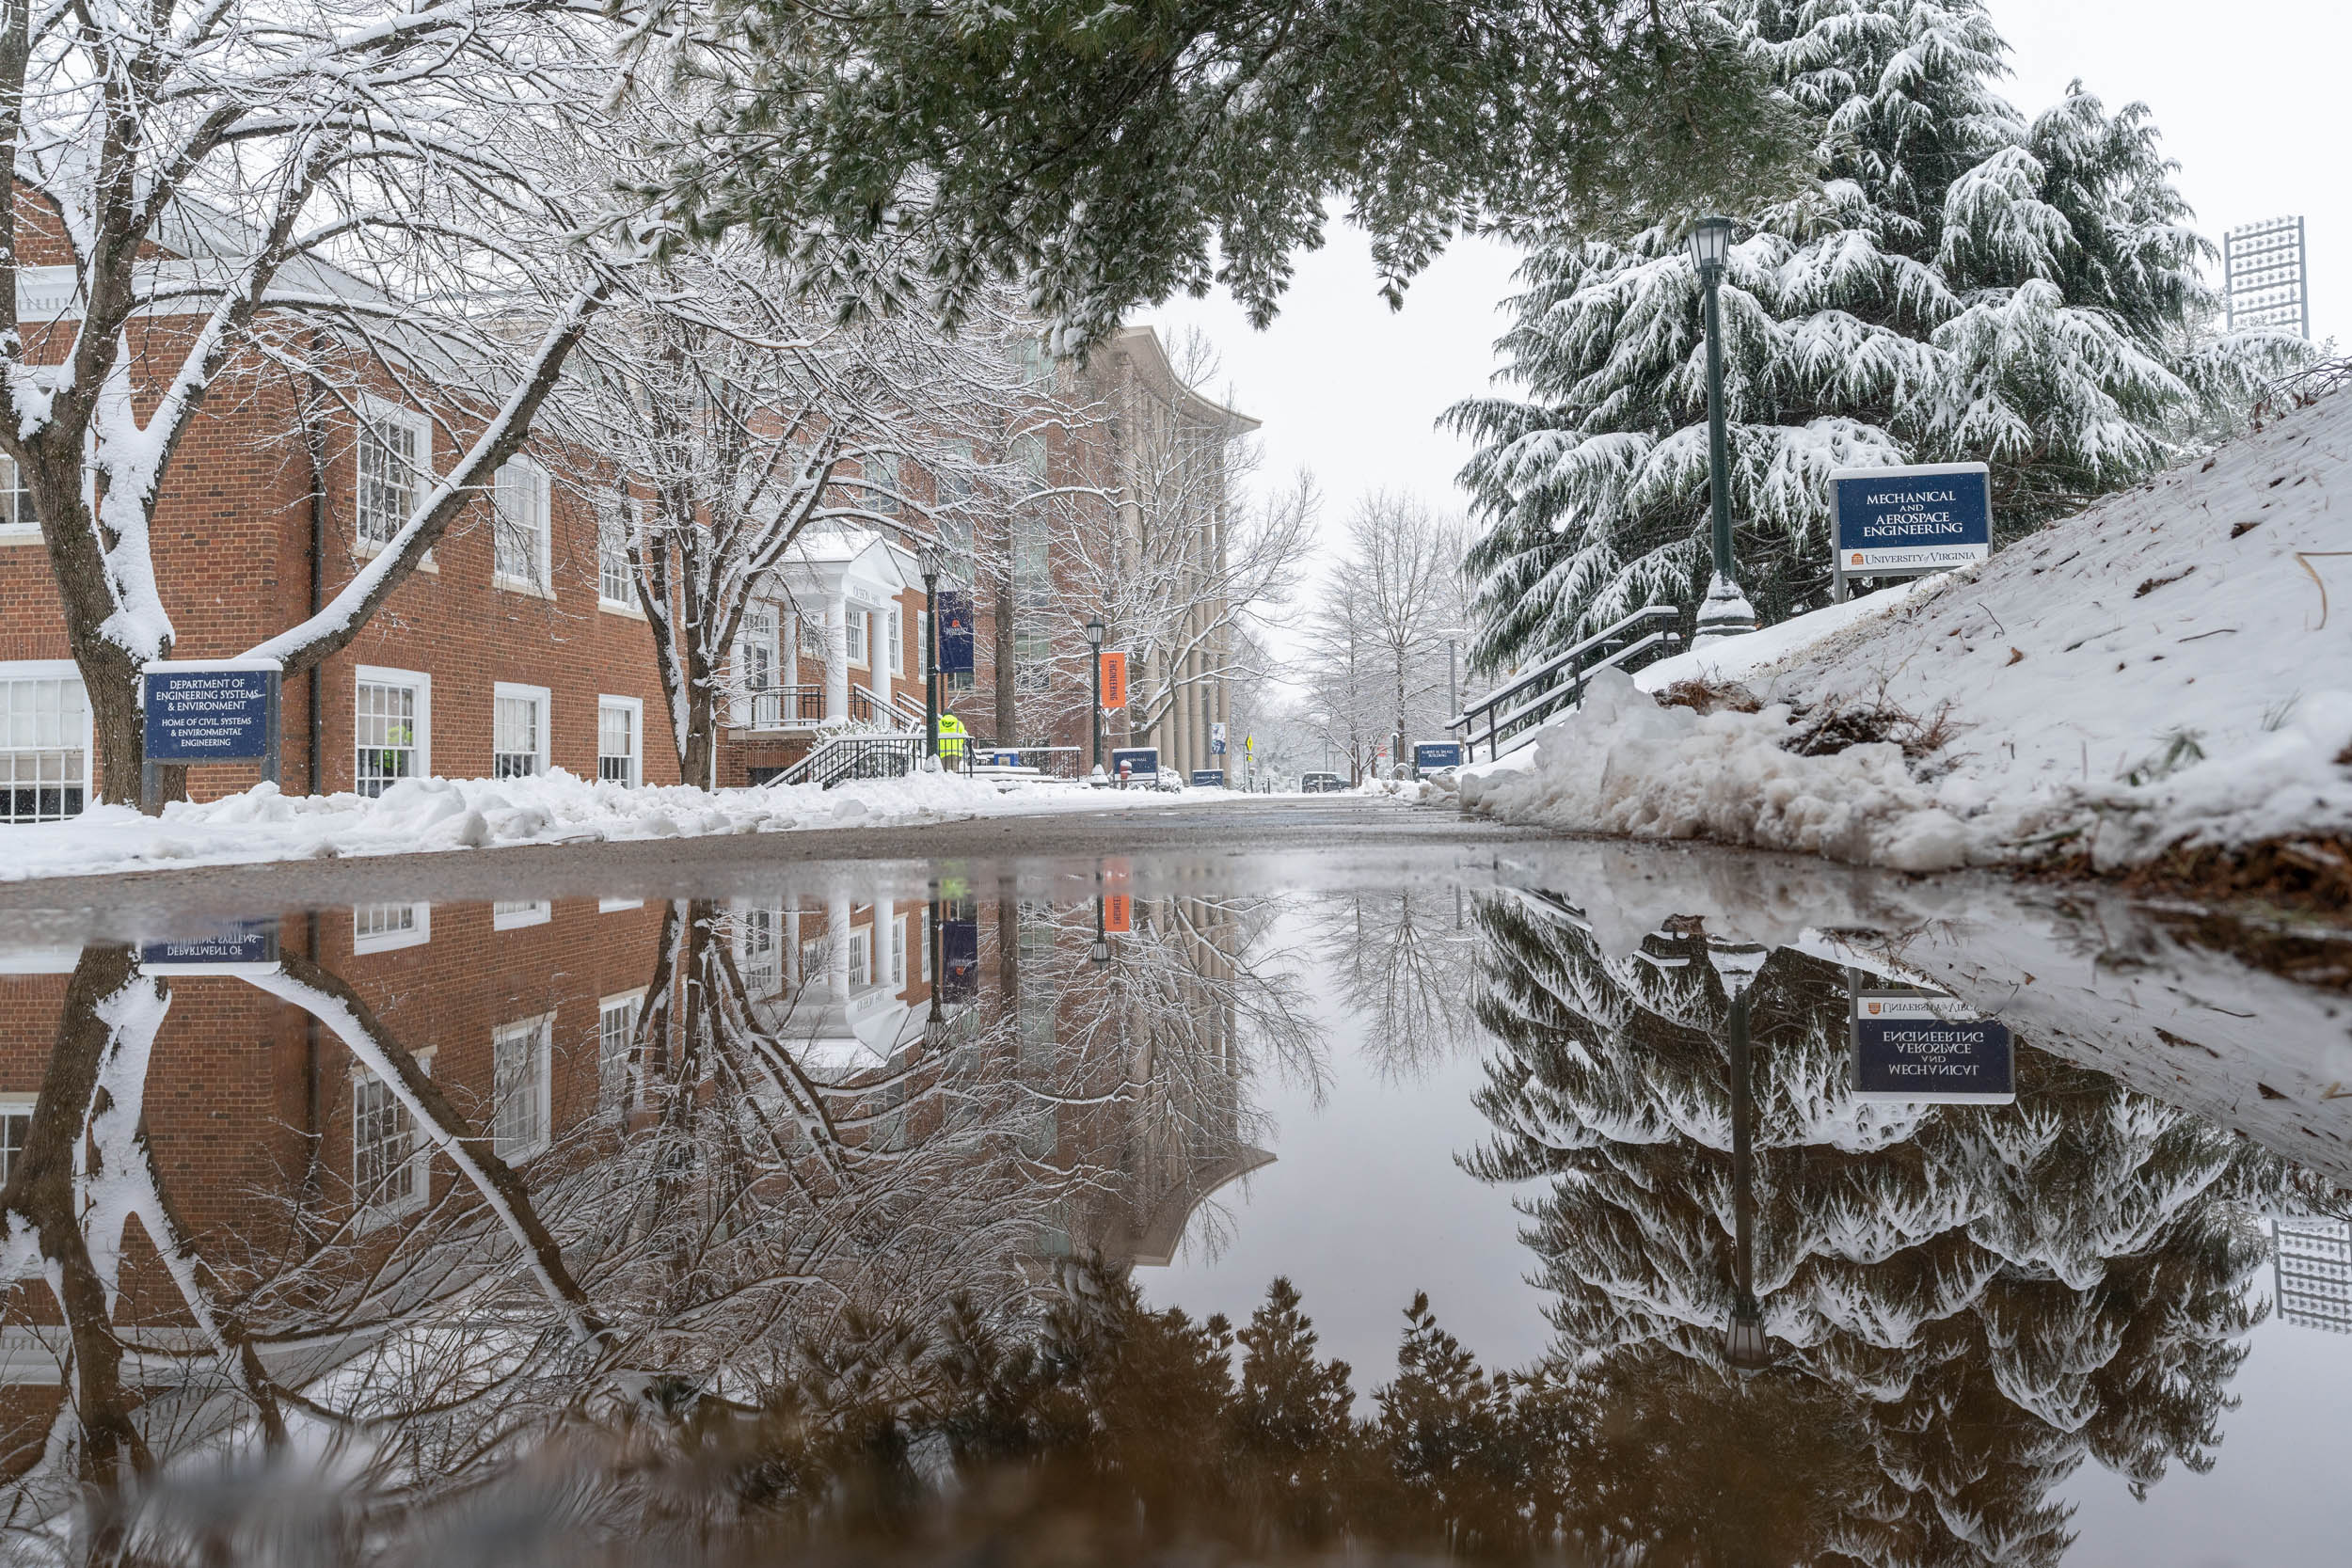 Snow covered trees and building reflecting off of a puddle on road